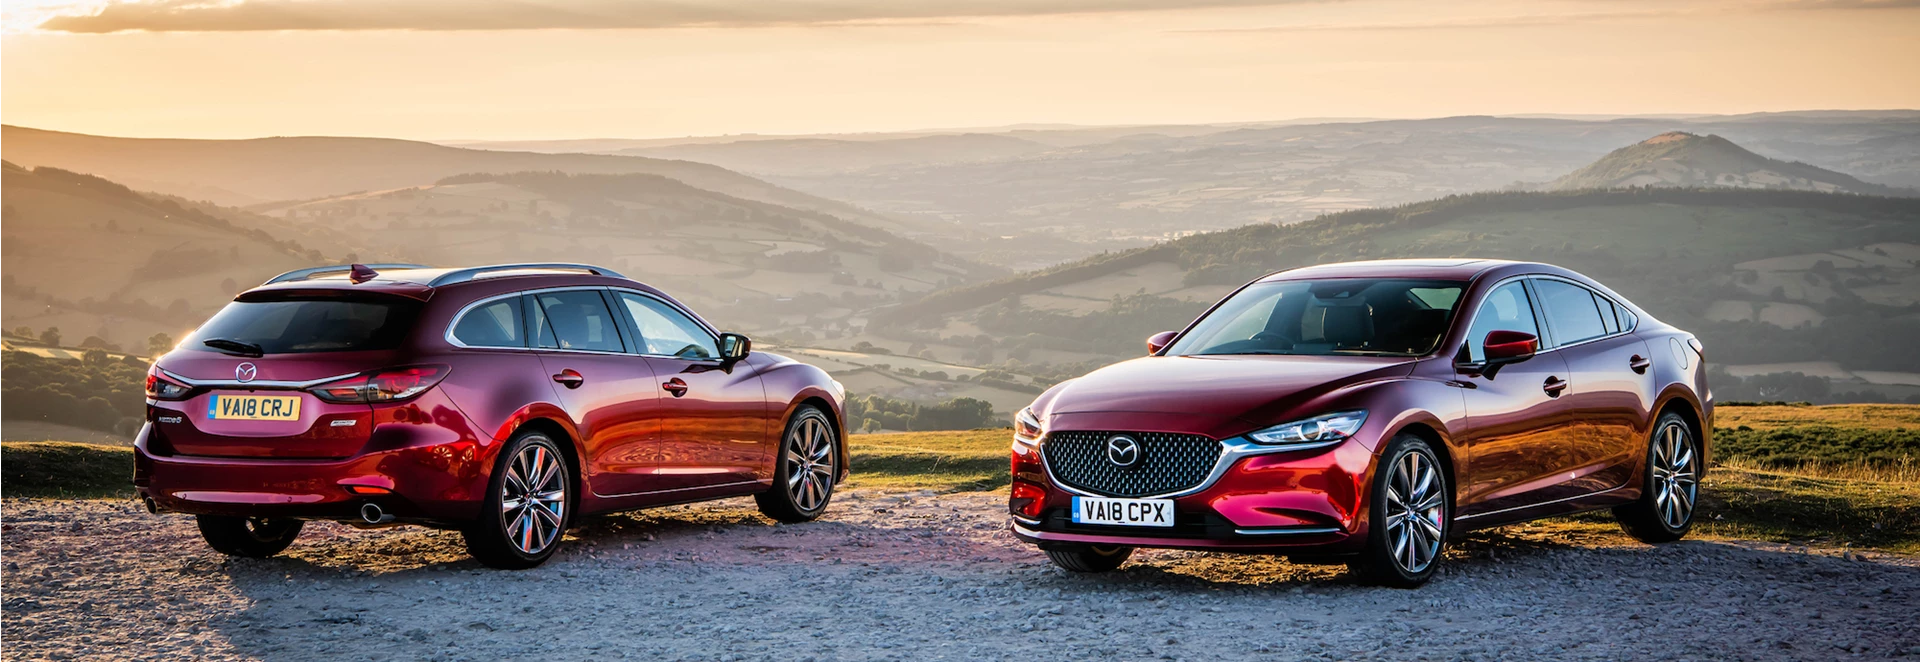 The safest family cars to drive in 2019